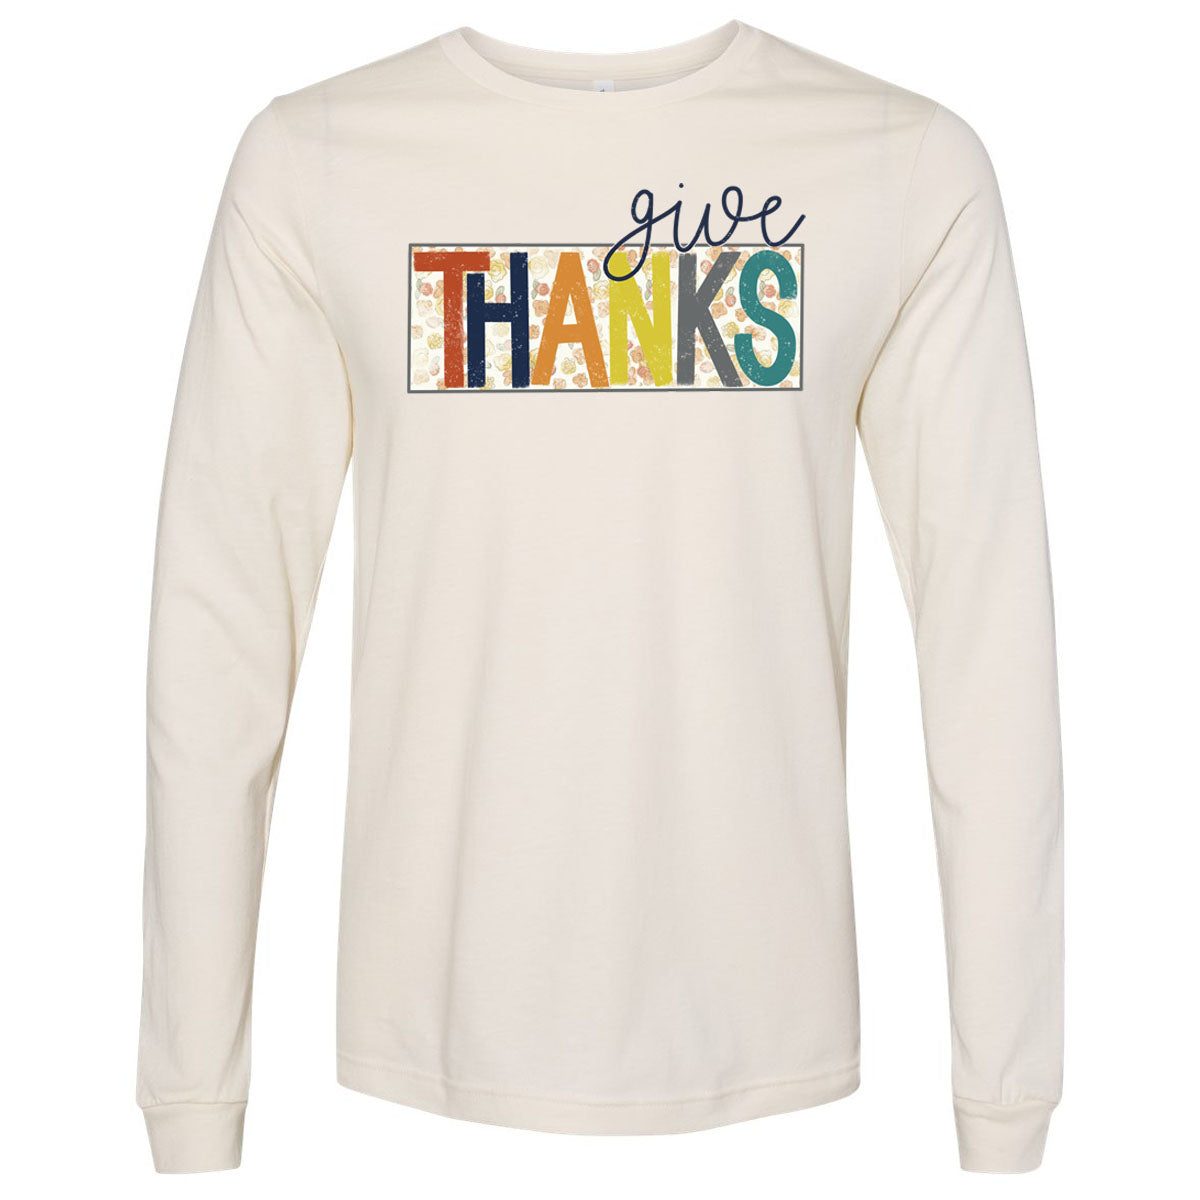 Give Thanks Floral Box - Natural Tee - Southern Grace Creations